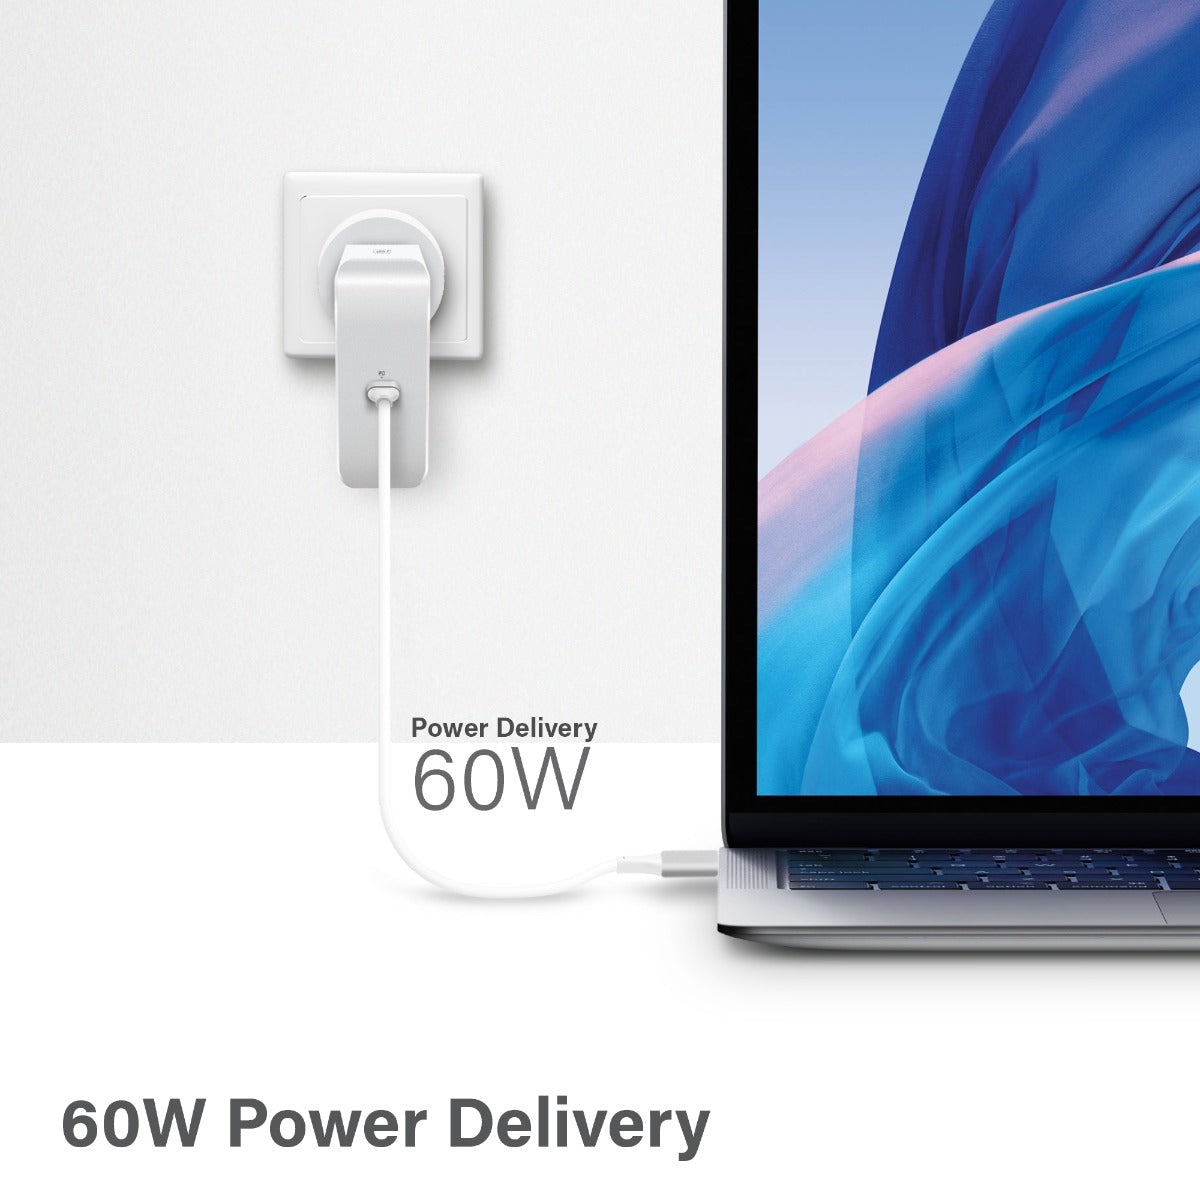 usb-c-laptop-macbook-wall-charger-60w-with-power-deliverya-travel-edition-with-au-eu-uk-us-plugs-and-2m-cable_6